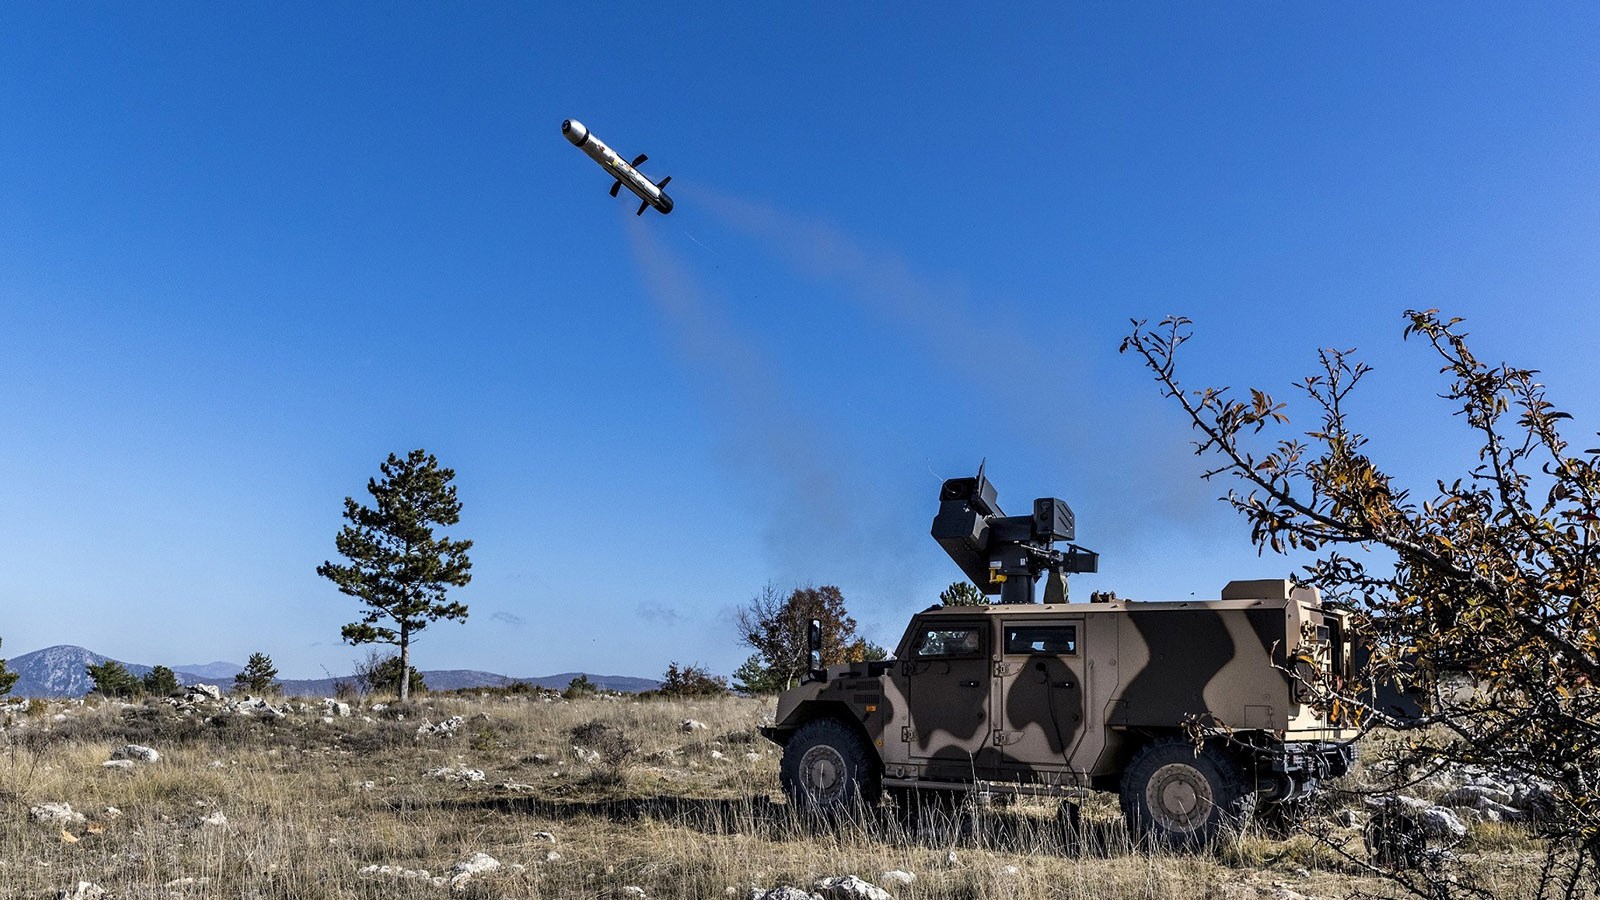 MBDA Conducts First Firing of MMP Anti-tank Guided Missile from Vehicle-Mounted IMPACT Turret